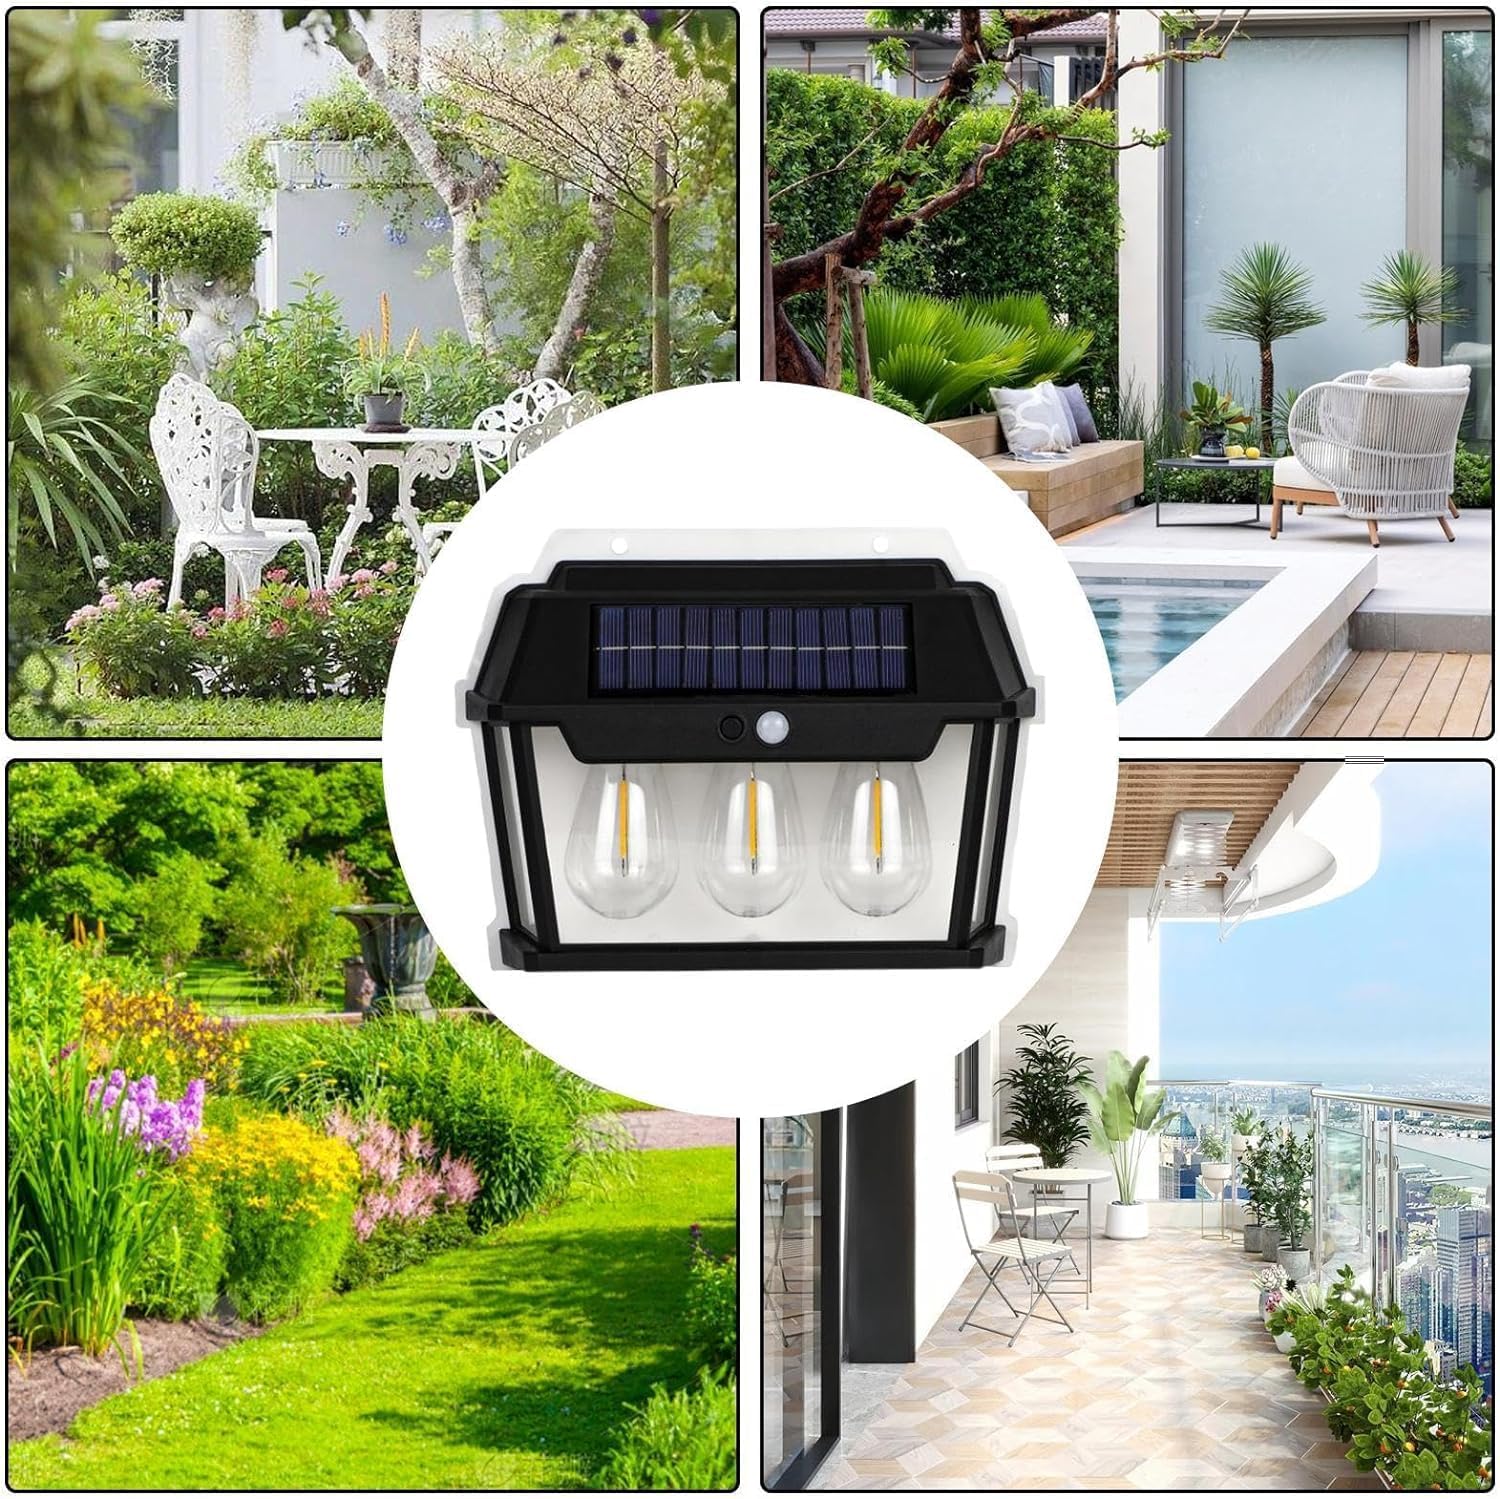 SkyShopy LED Bright Outdoor Solar Lights Wall lamp Wall Lights Outdoor, Wireless Dusk to Dawn Porch Lights Fixture, Solar Wall Lantern with 3 Modes & Motion Sensor